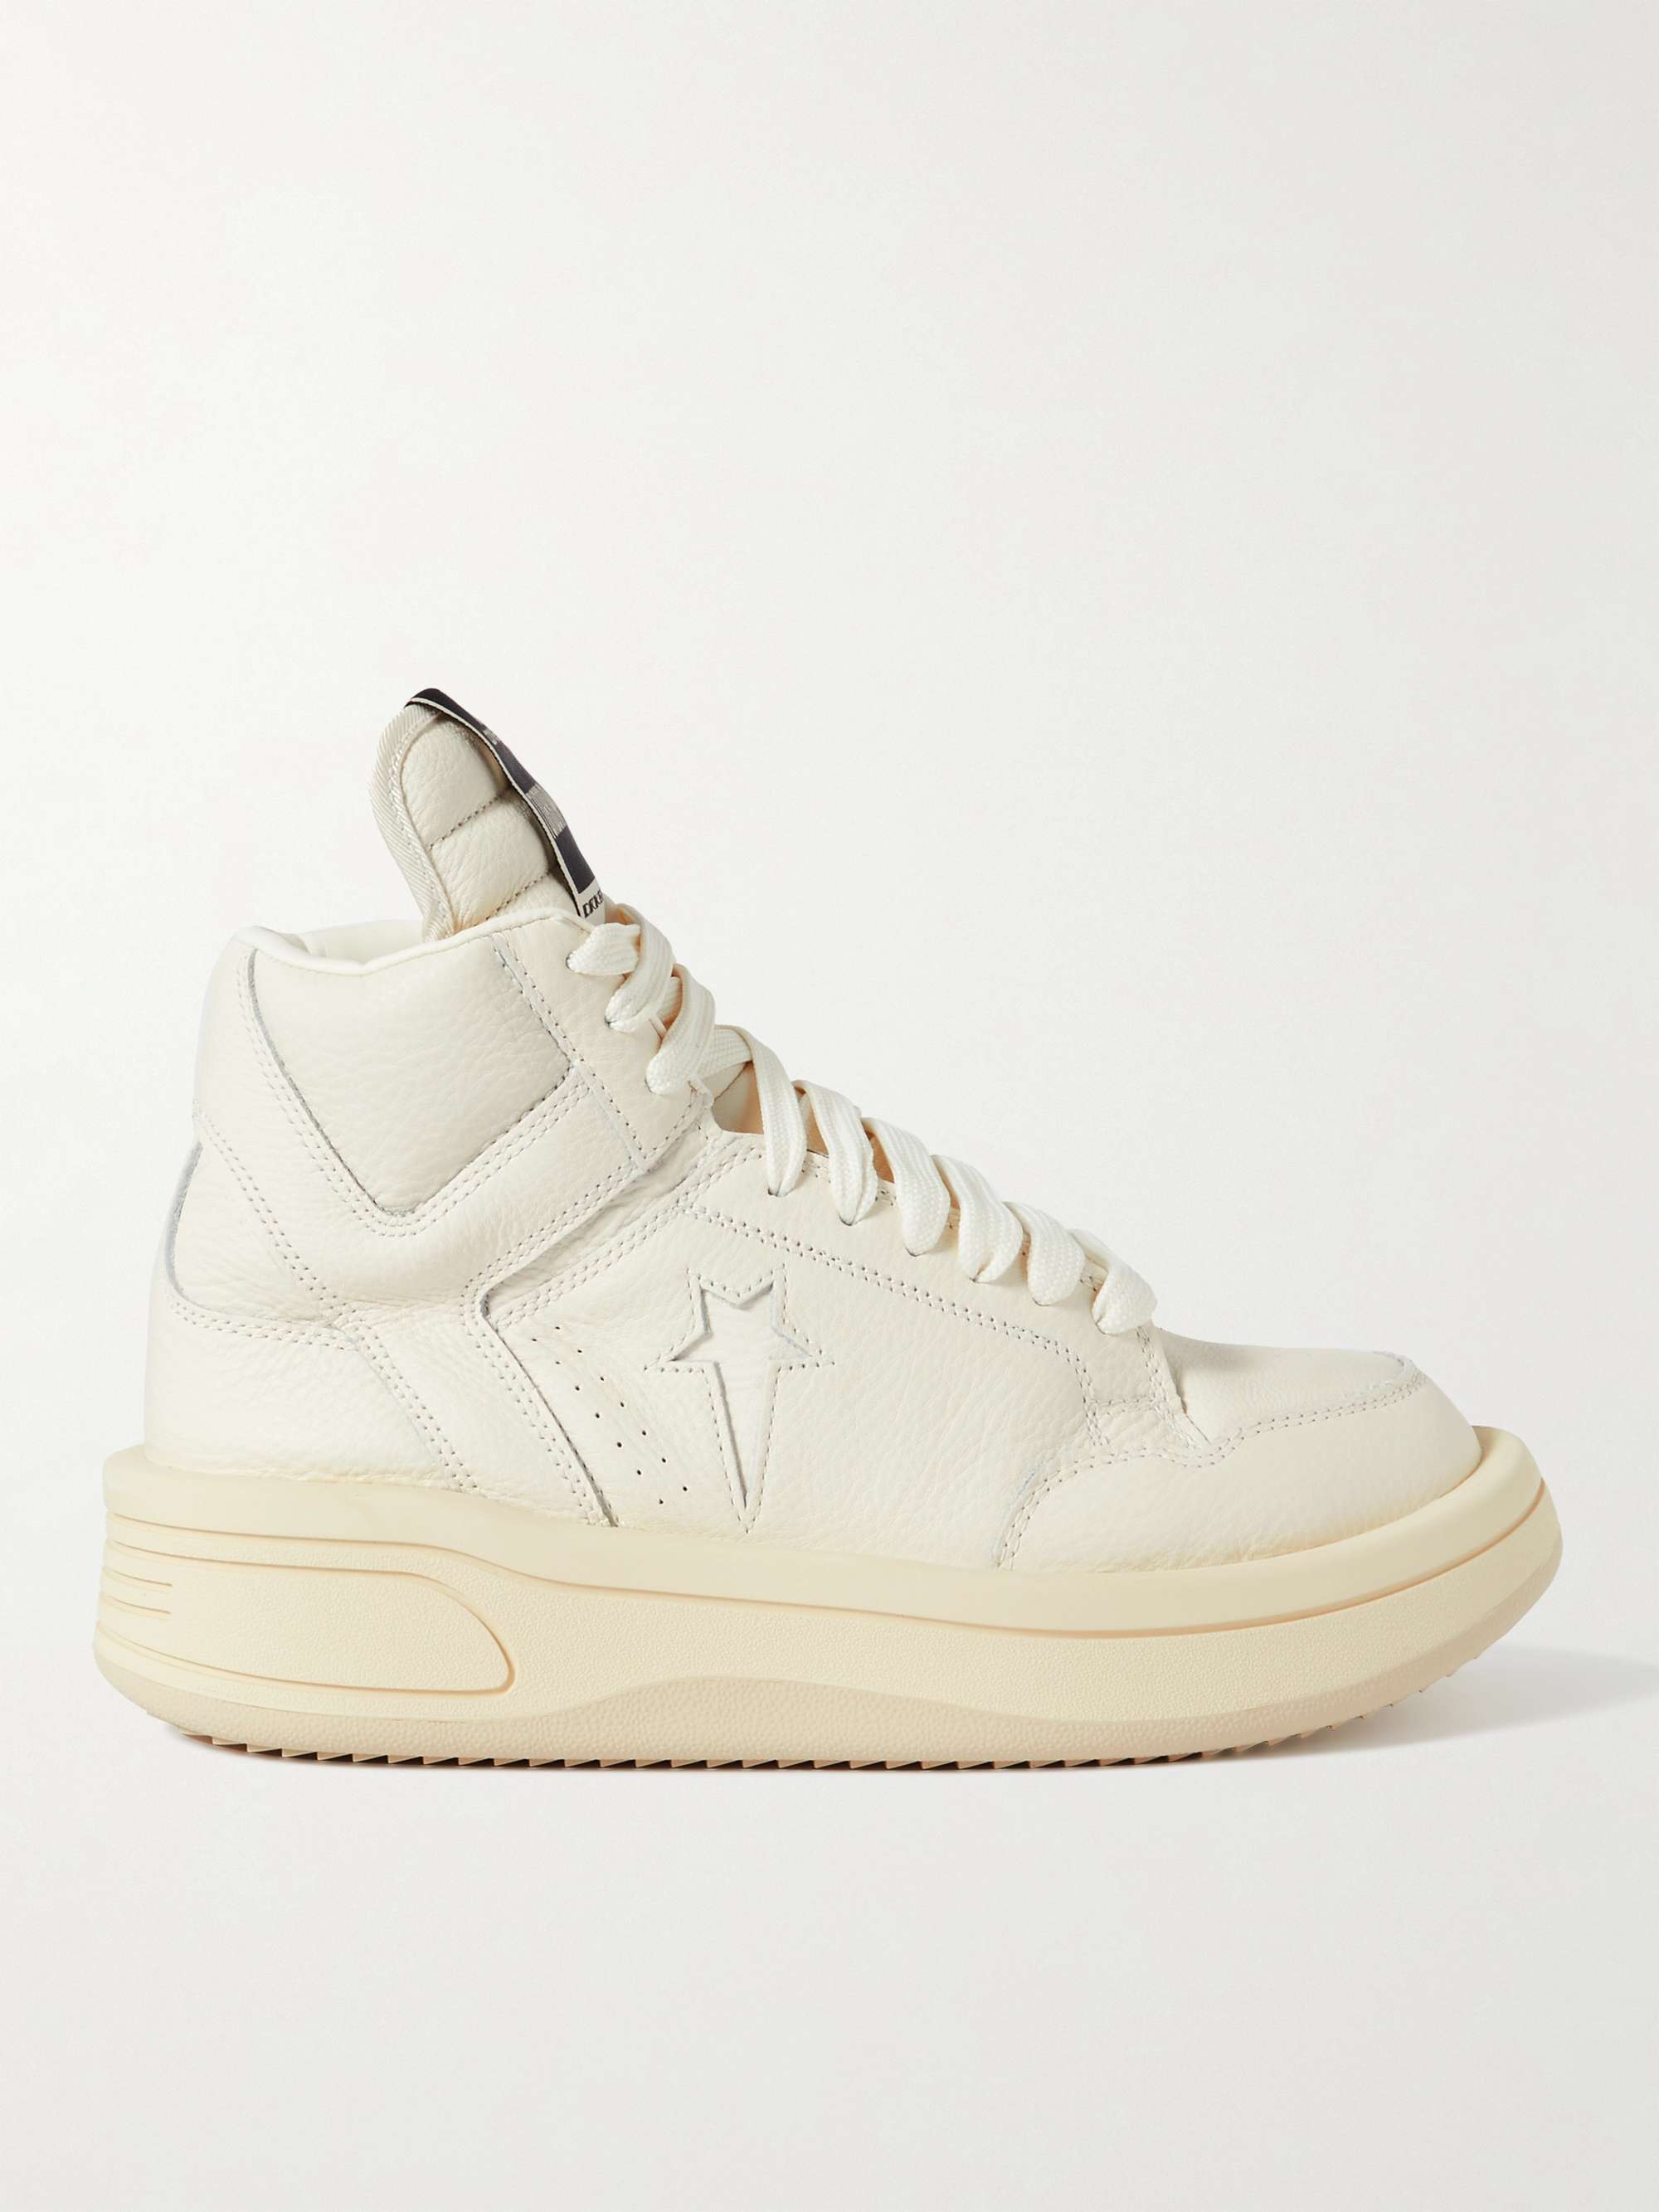 RICK OWENS + Converse TURBOWPN Leather Sneakers